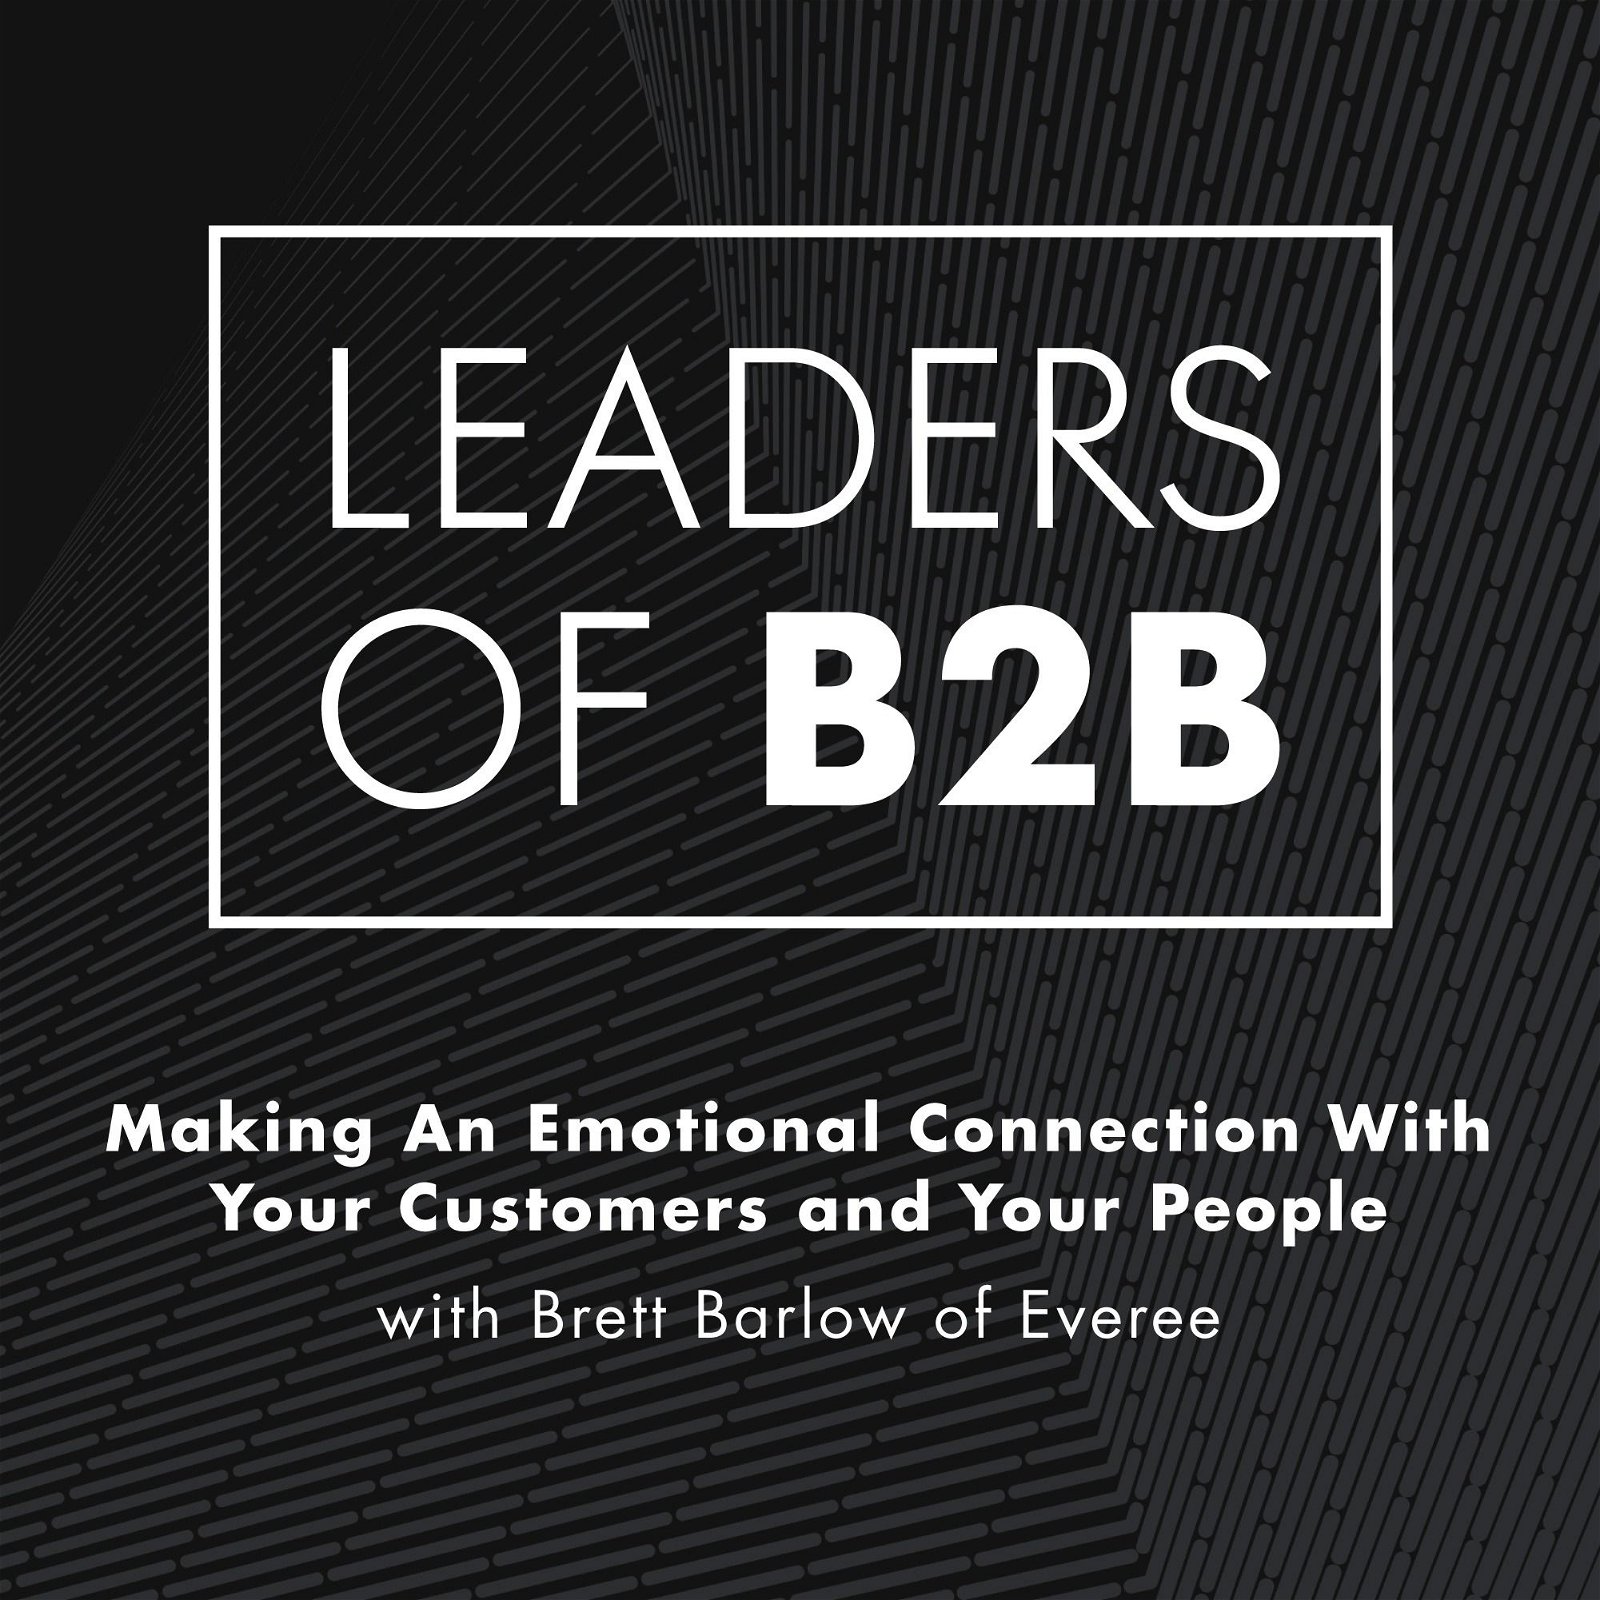 Making An Emotional Connection With Your Customers and Your People with Brett Barlow of Everee